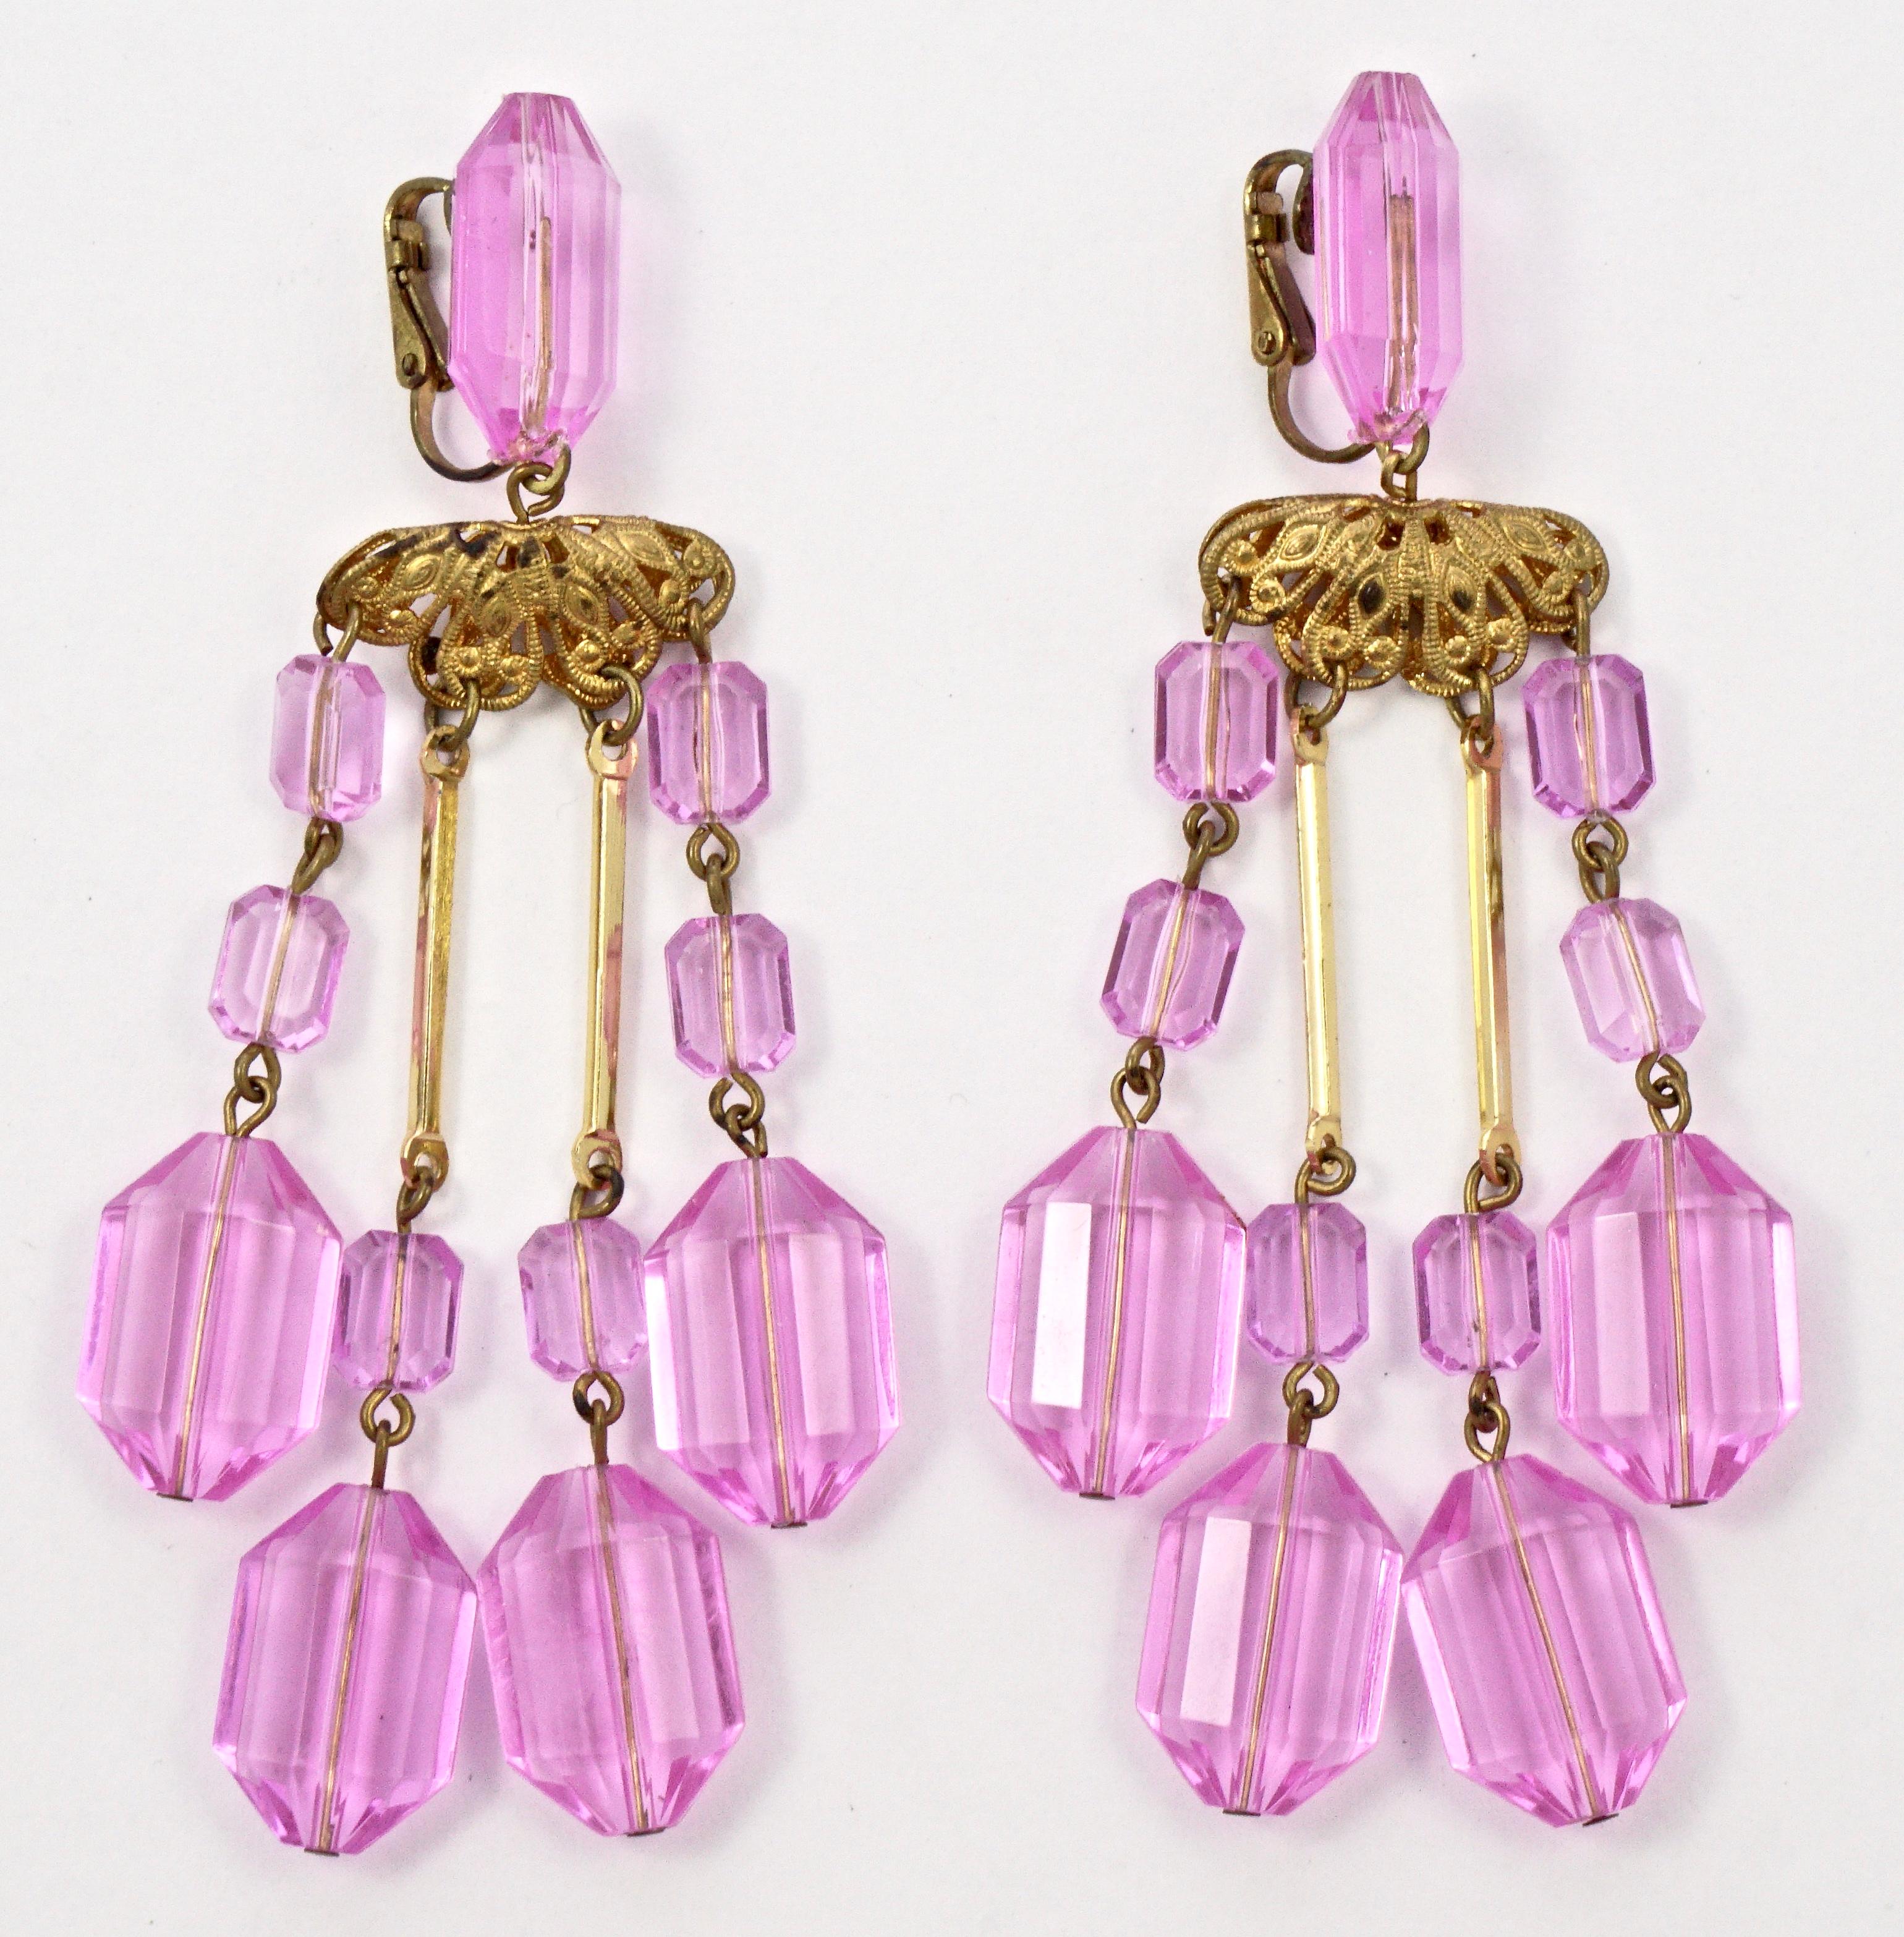 Women's or Men's Gold Plated Filigree Clip On Chandelier Statement Earrings with Pink Beads 1960s